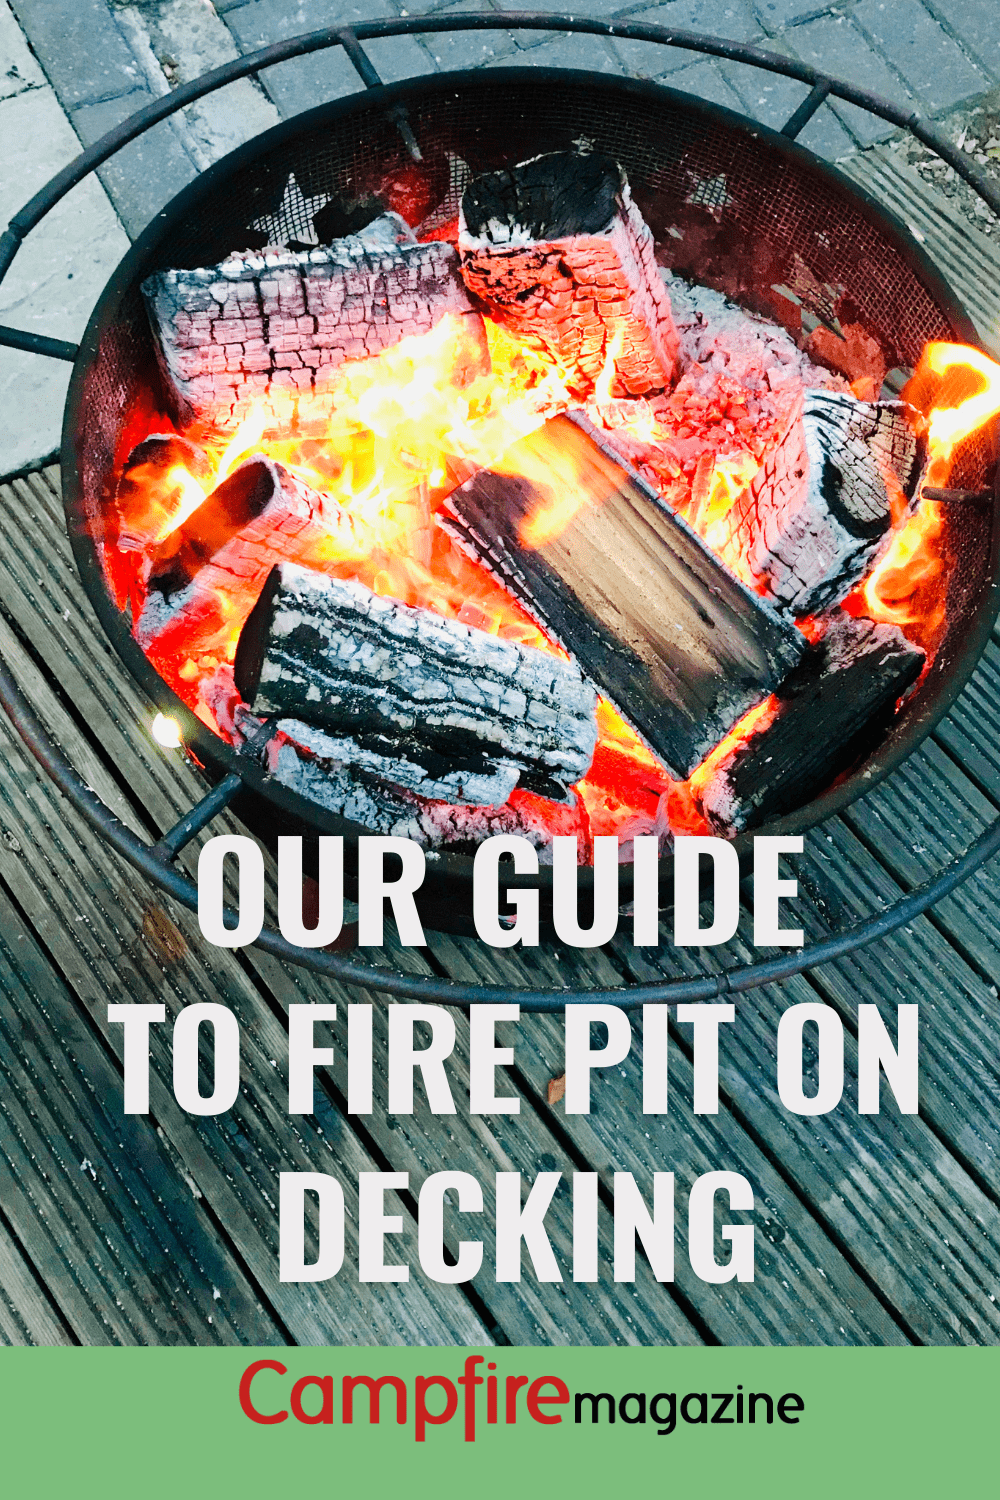 Our Guide To Have A Fire Pit On Decking Campfire Magazine